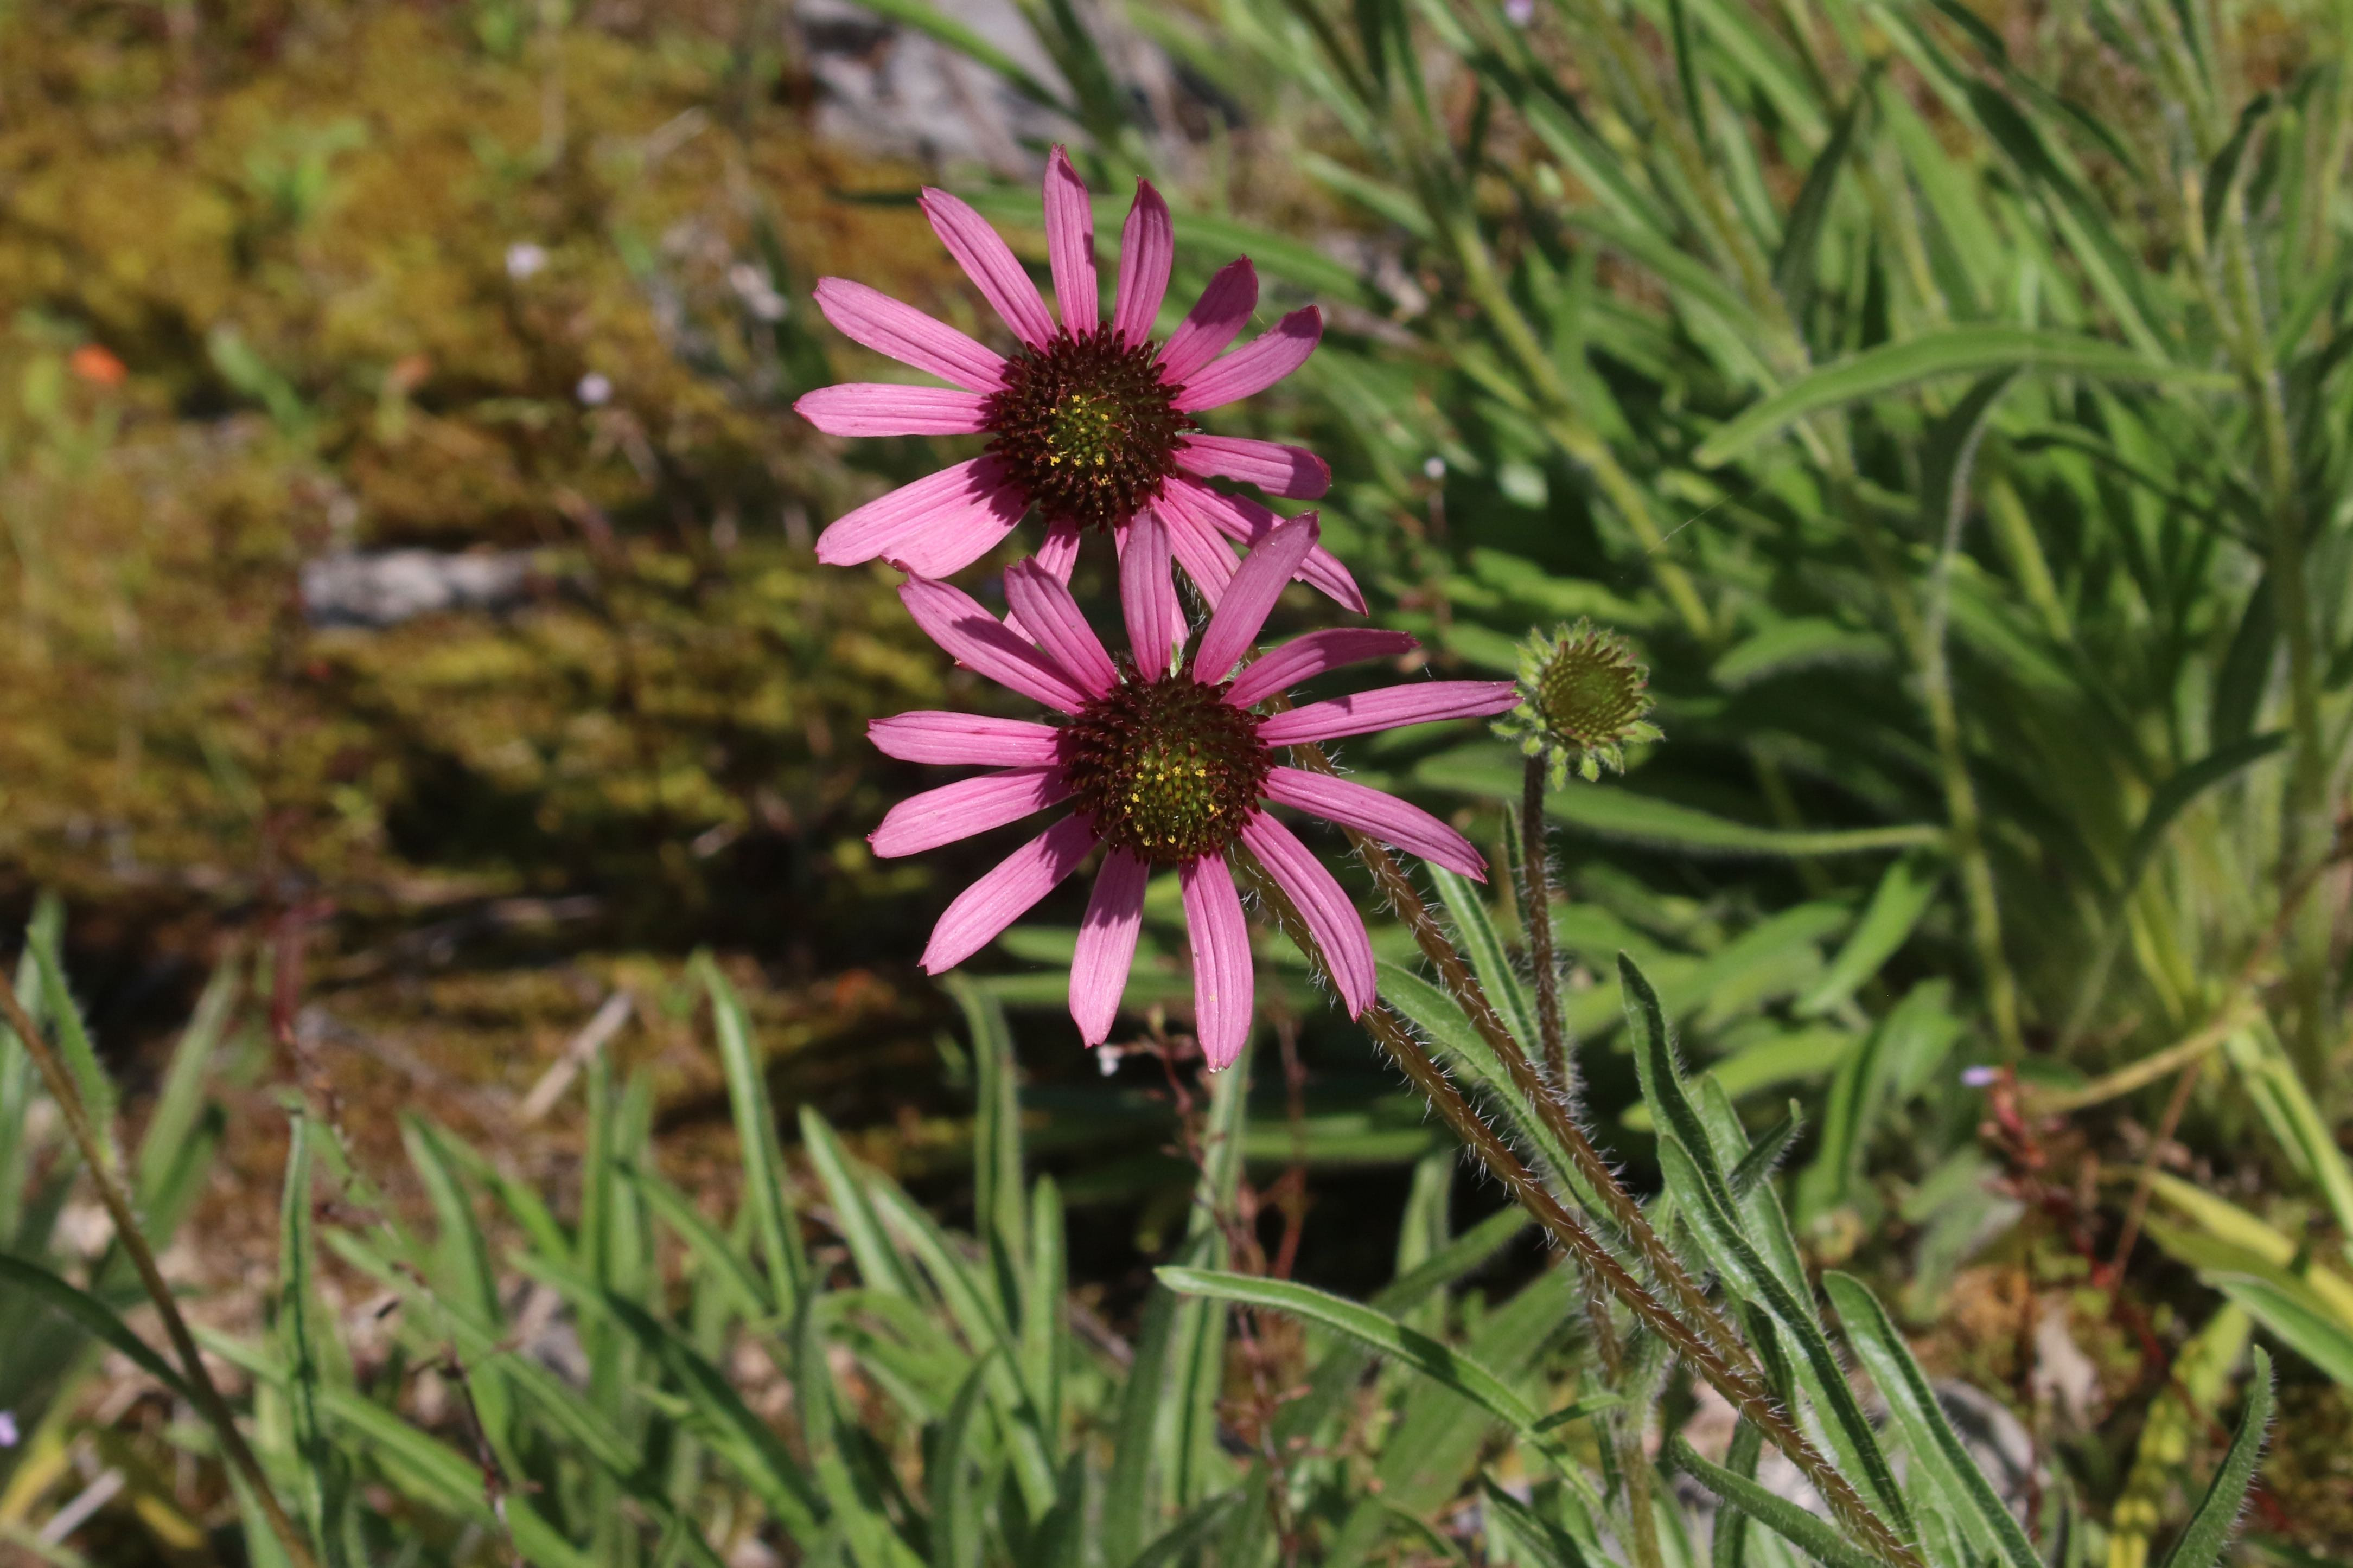 The Scientific Name is Echinacea tennesseensis. You will likely hear them called Tennessee Purple Coneflower. This picture shows the Note the densely hairy stems and leaves. of Echinacea tennesseensis